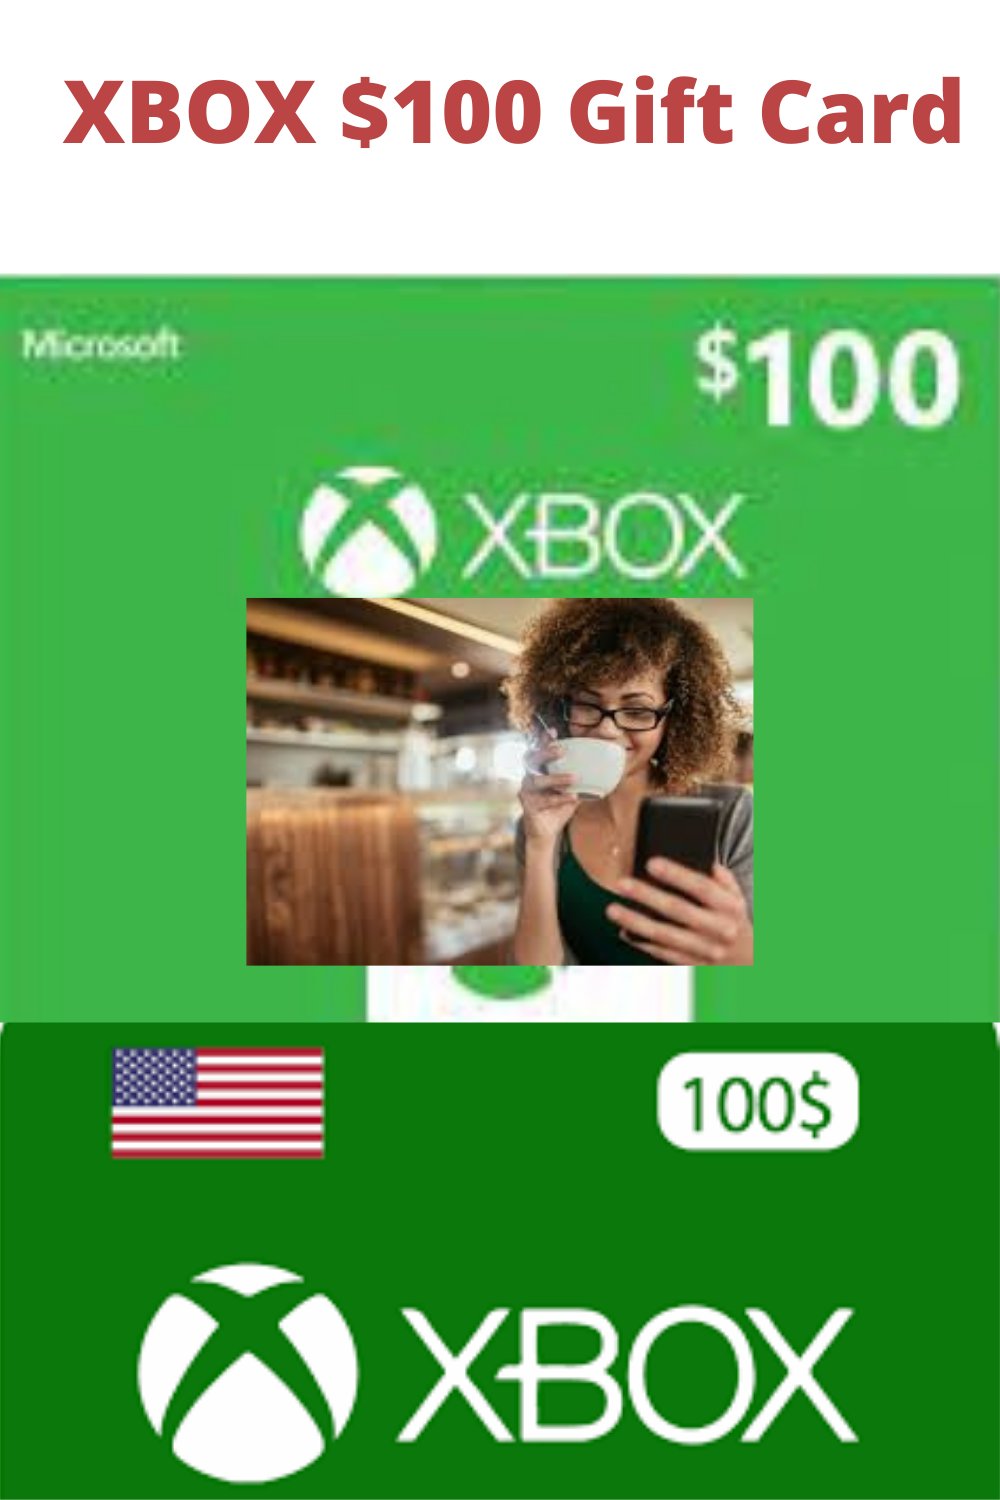 vlotter Blind vertrouwen Nationaal Sherry J. Hoover on Twitter: "Xbox Live Gold Free | Xbox gift card giveaway Xbox  redeem code generator - free Xbox gift card codes list unused  #freexboxgiftcard #xboxgiftcardwalmart #freexboxgiftcardcodes  #xboxgiftcardamazon #xboxgiftcard ...